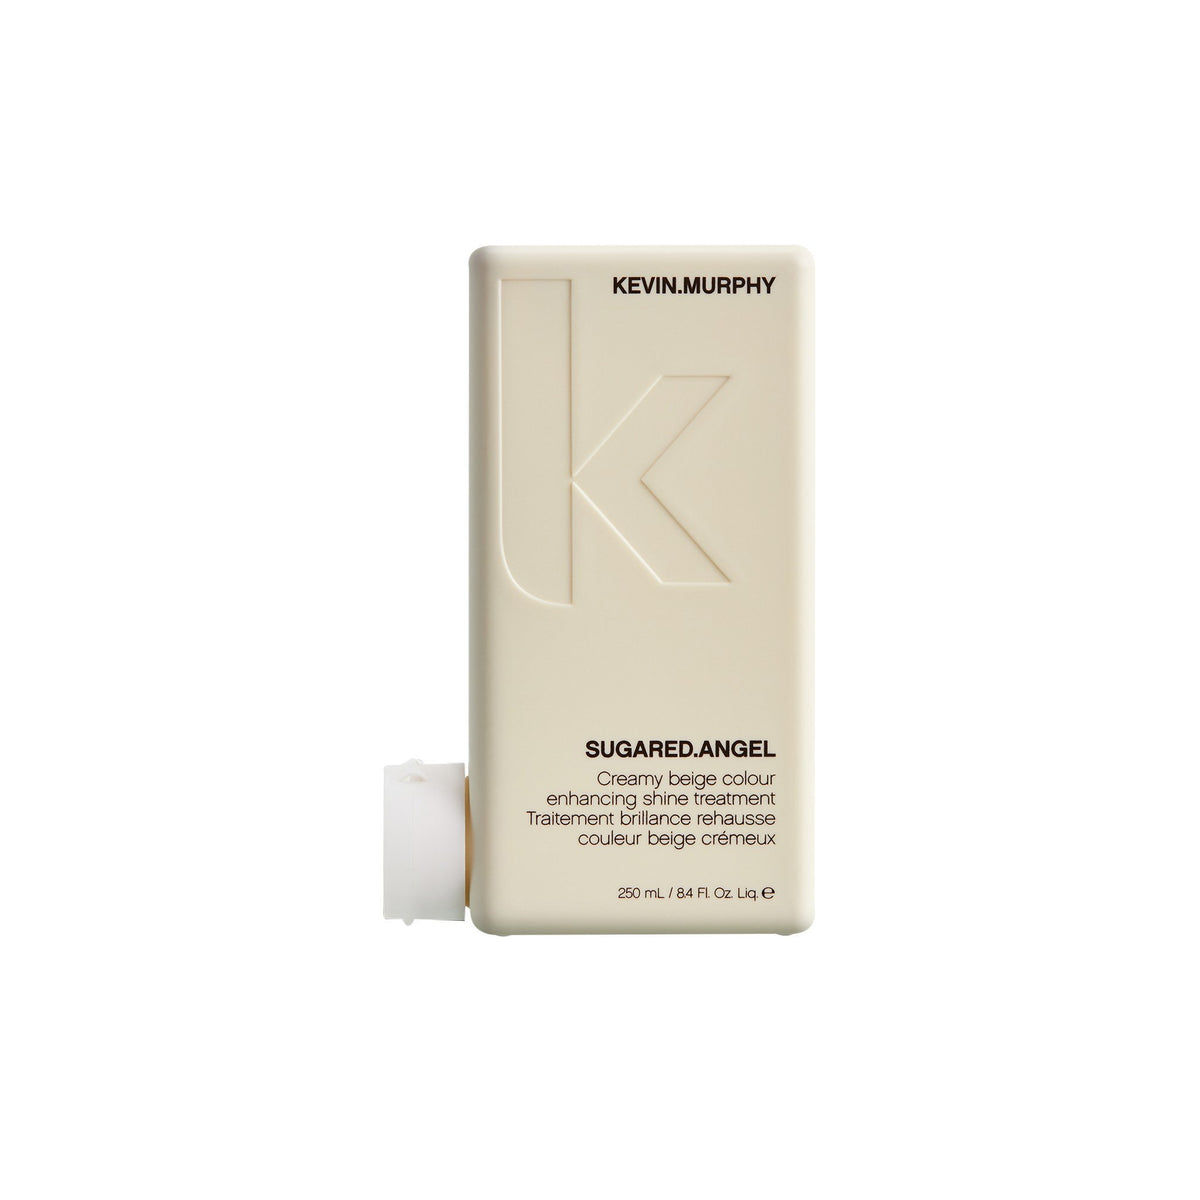 Kevin Murphy SUGARED.ANGEL 250ml